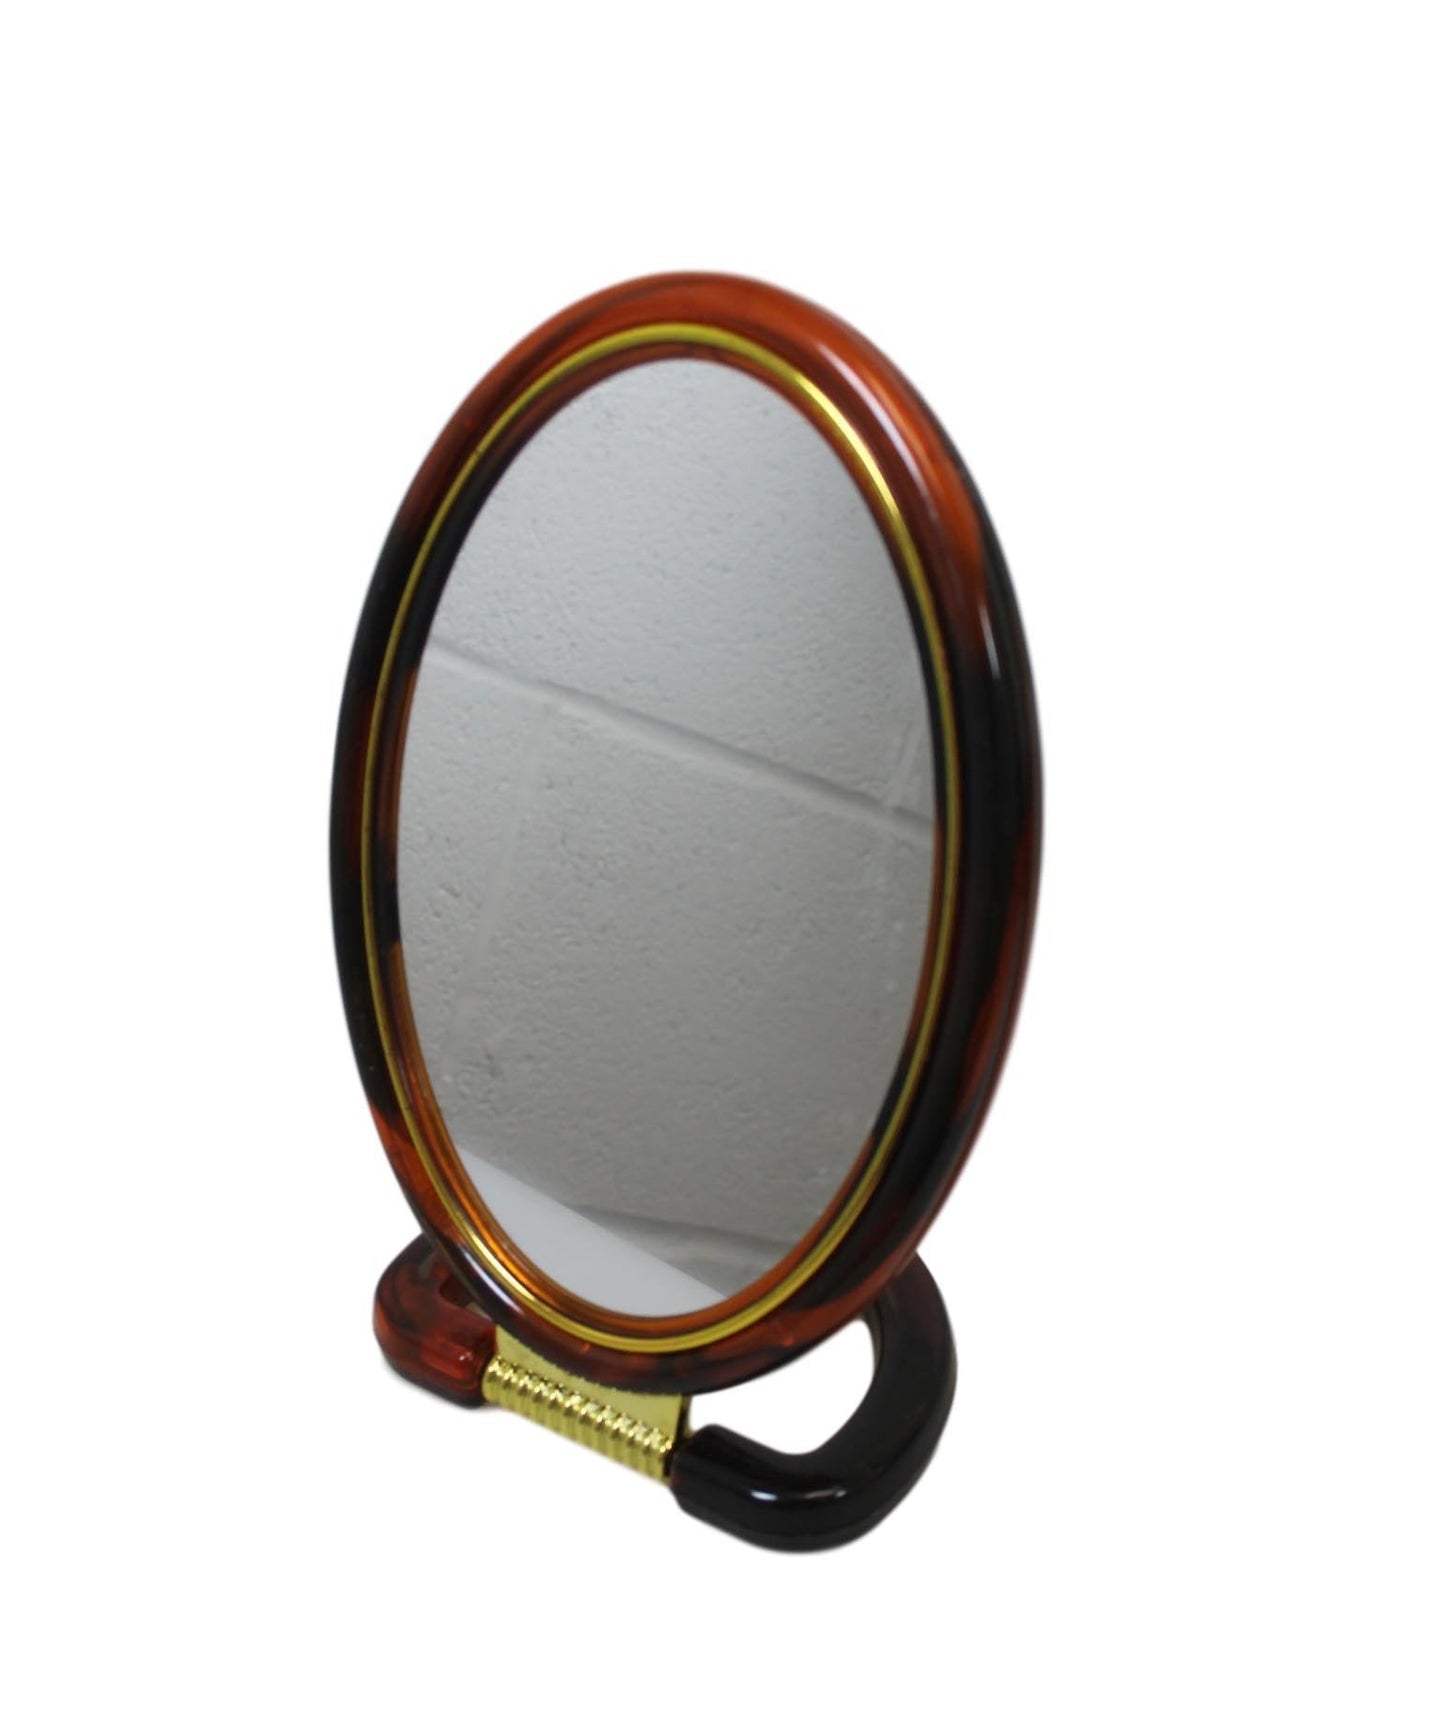 Double Sided Desk Stand Mirror One Side Magnifying One Side Regular 16cm 5949 (Large Letter Rate)